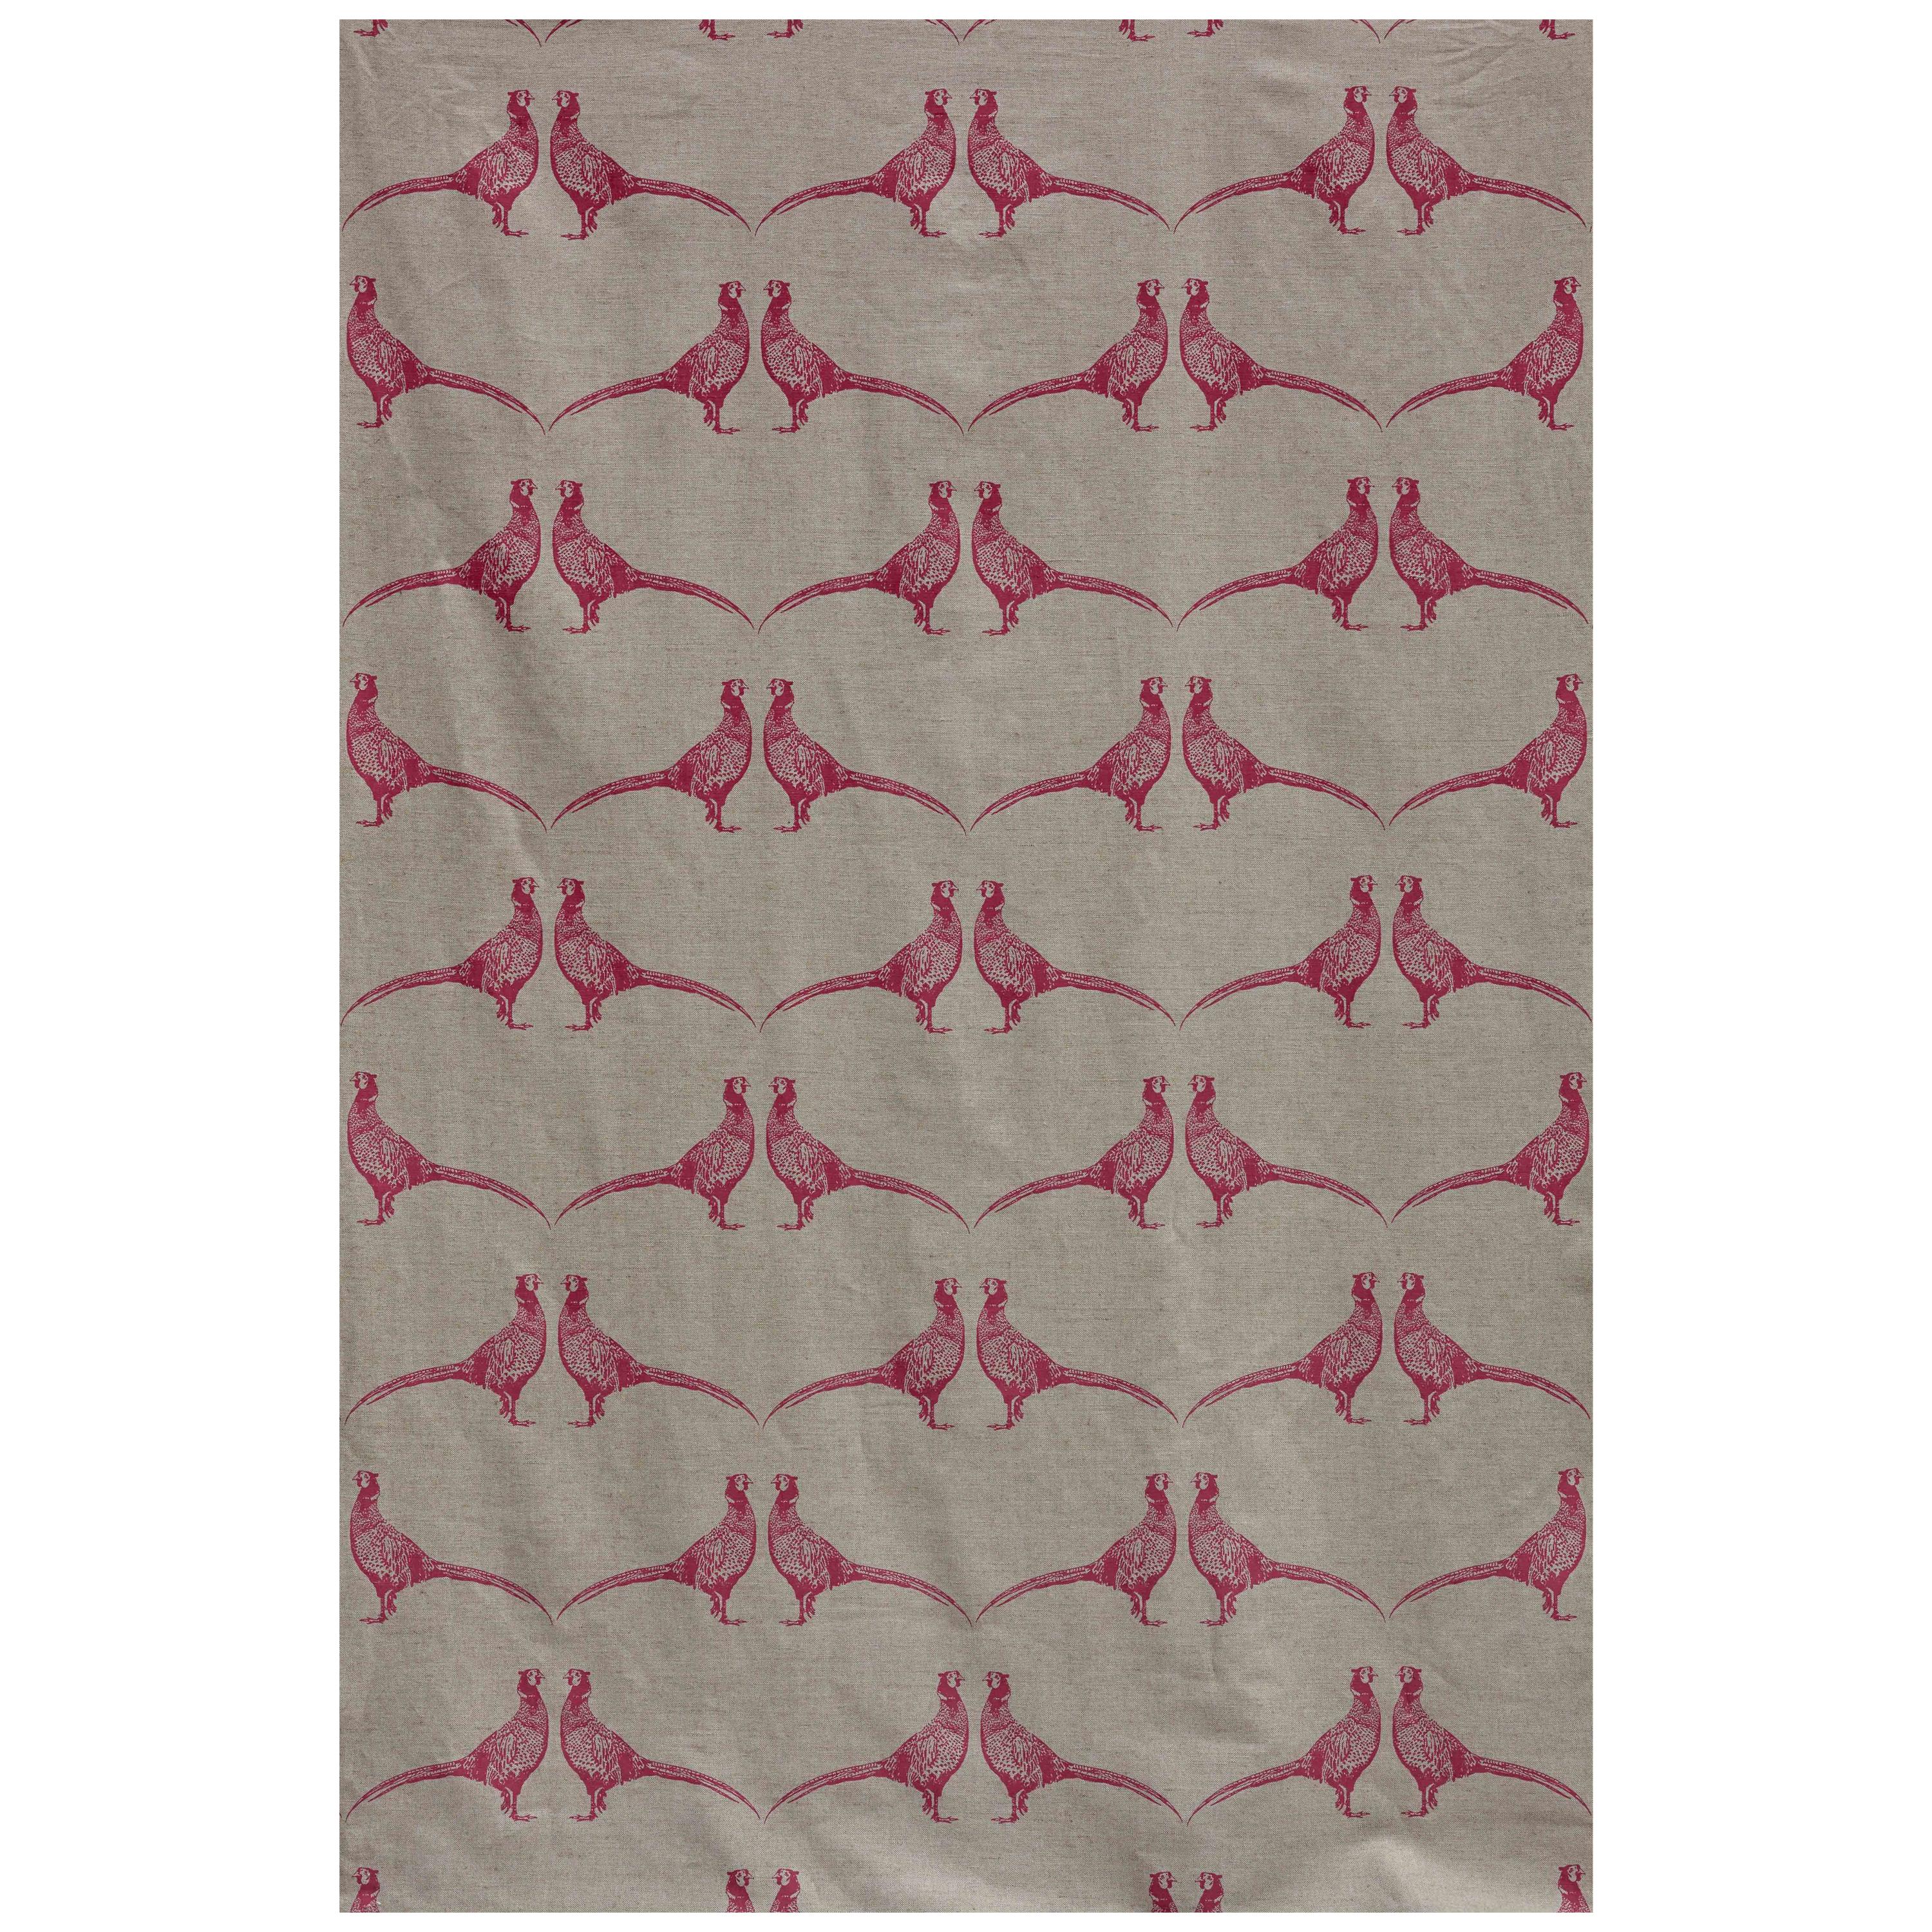 'Pheasant' Contemporary, Traditional Fabric in Pink on Natural For Sale